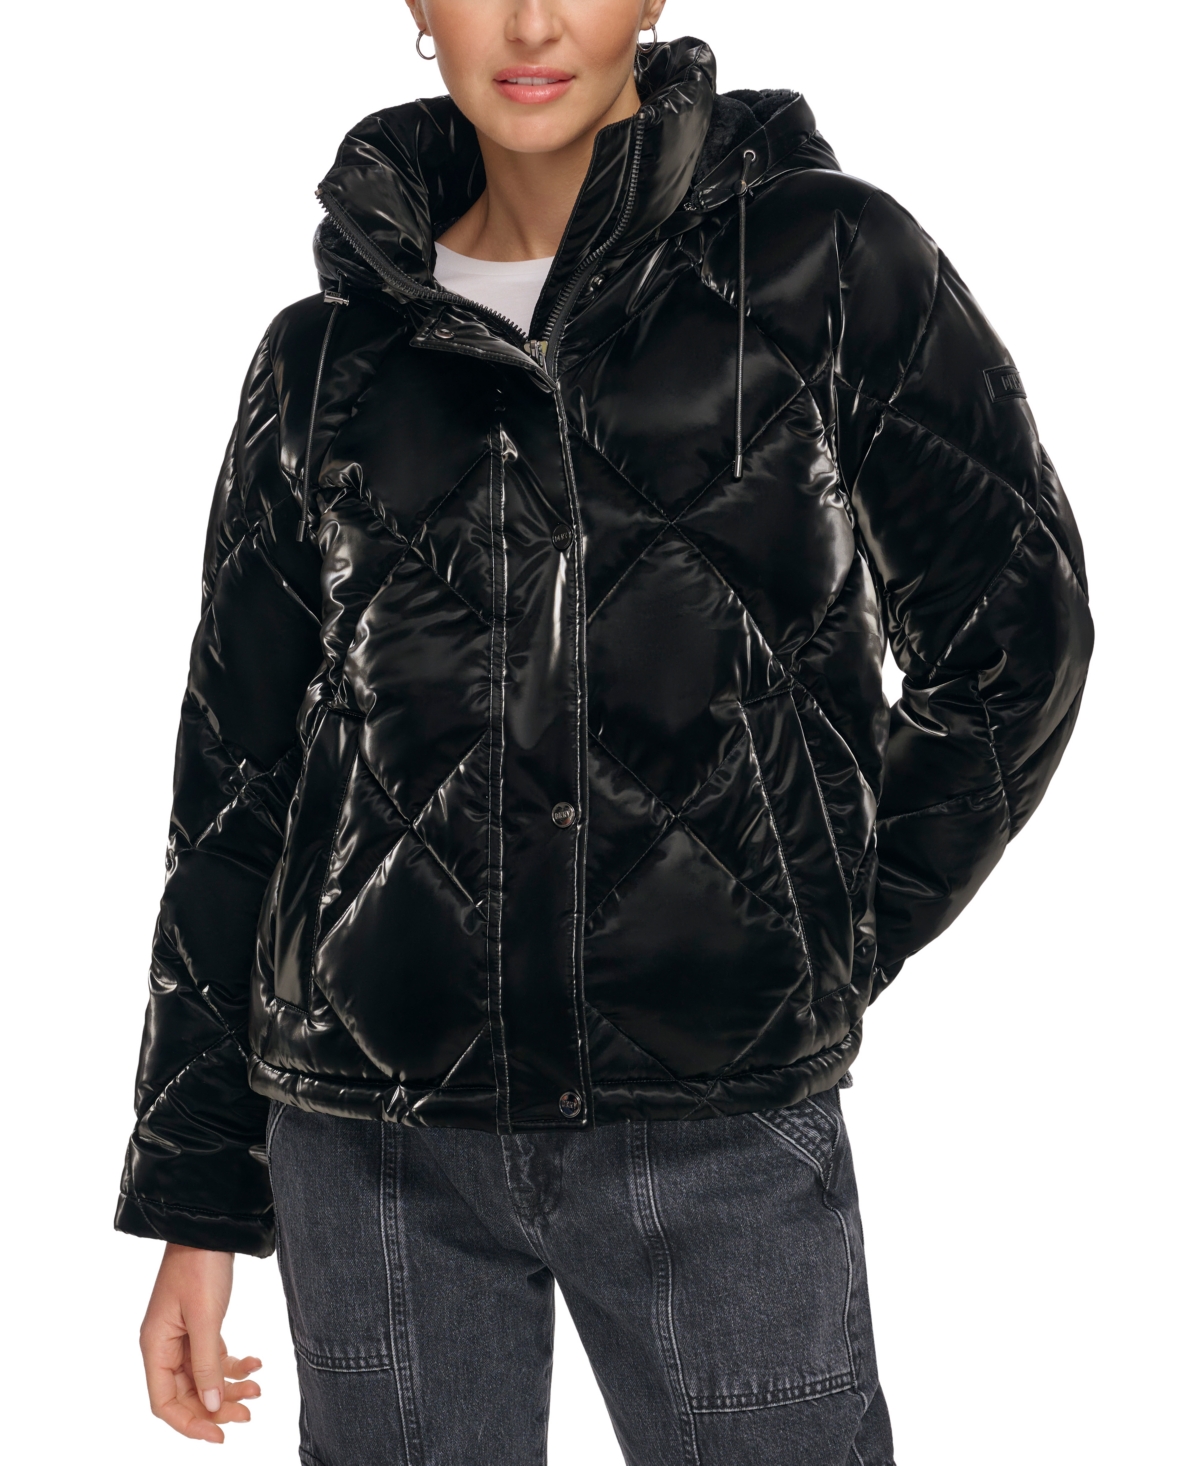 Women's DKNY Coats Sale, Up to 70% Off